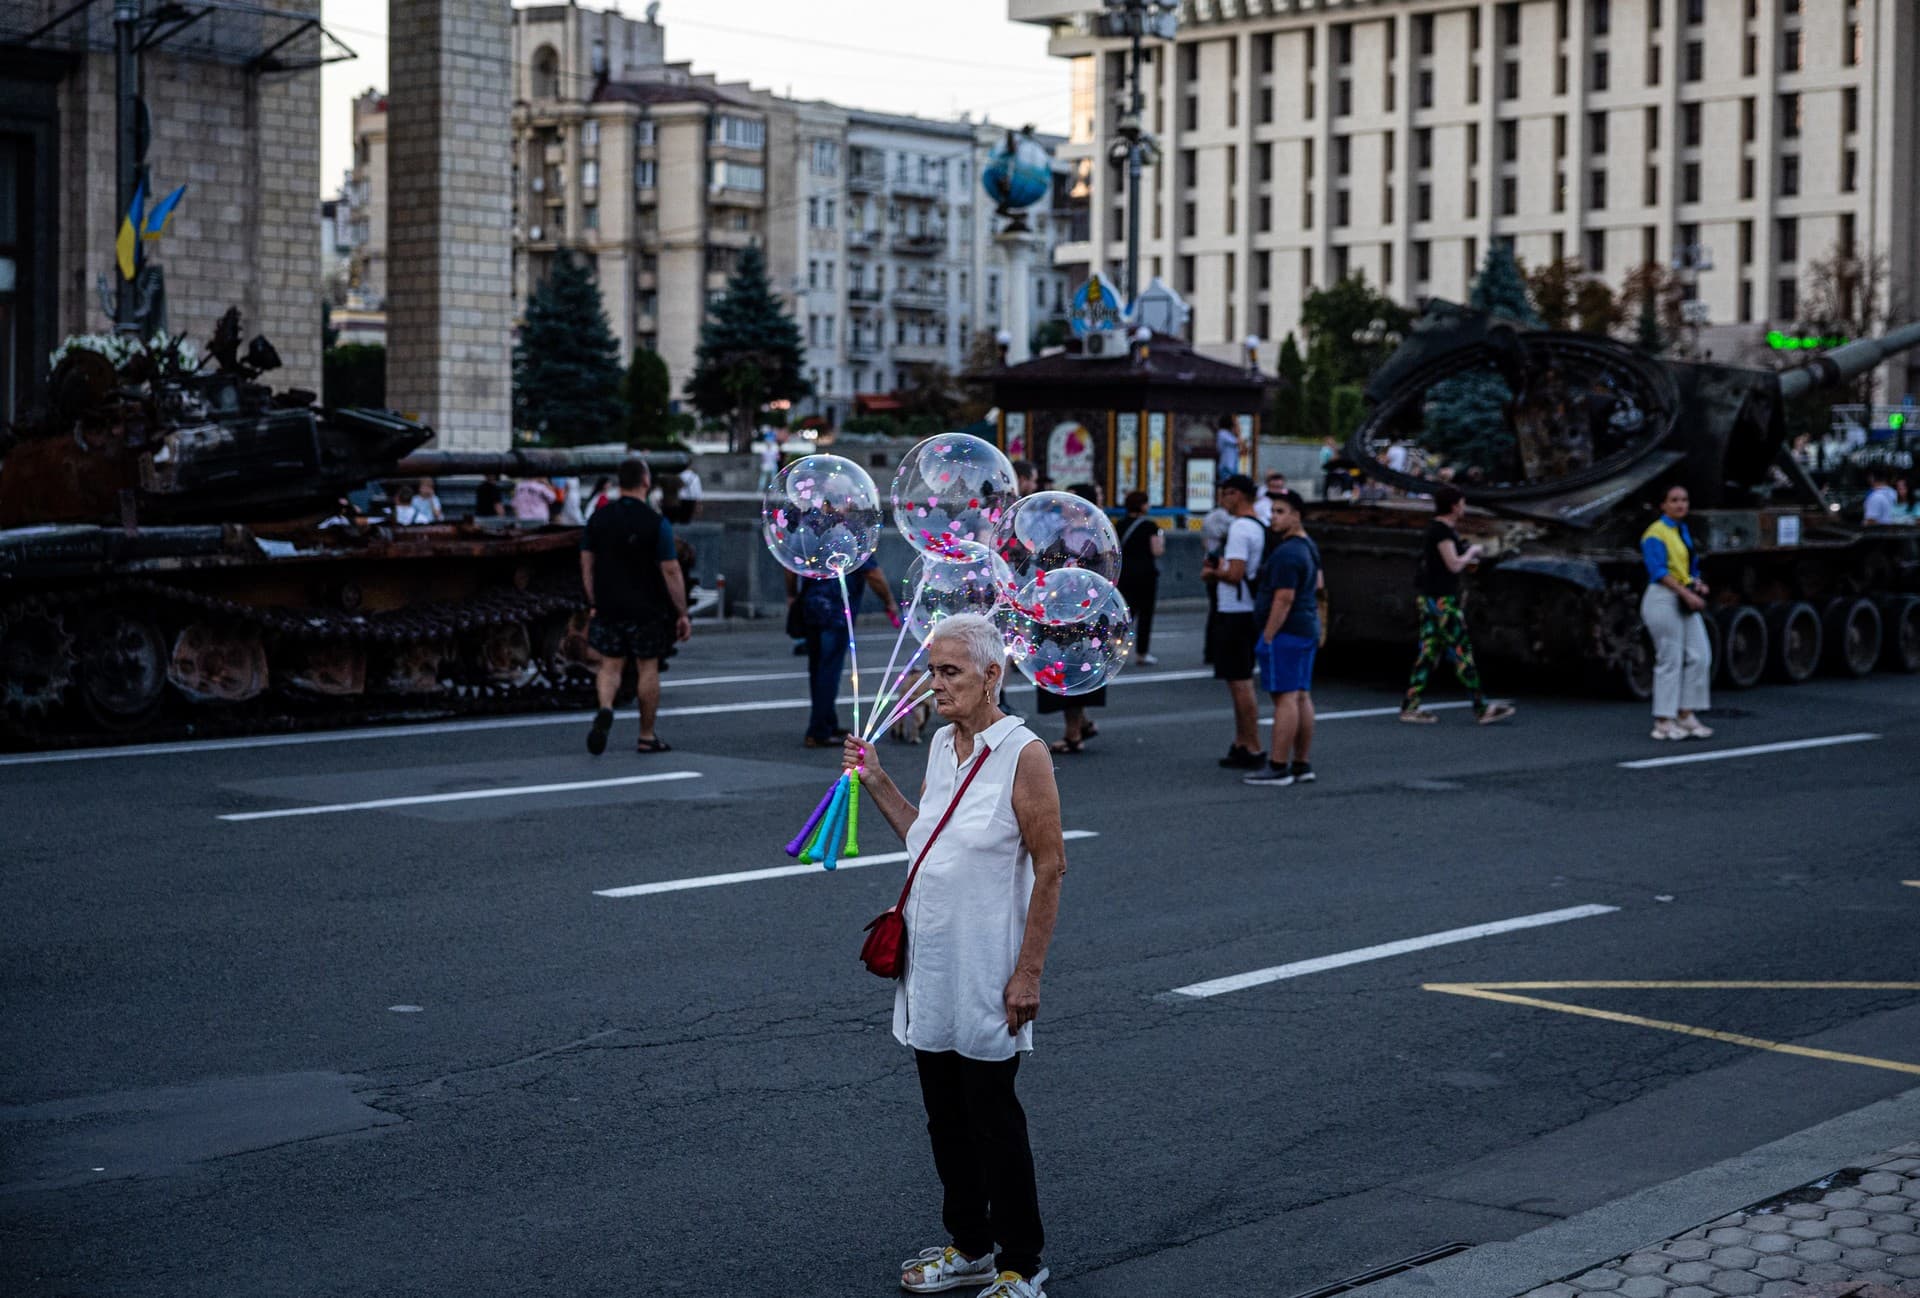 An elderly woman sells glowing balloons next to destroyed Russian military equipment in Kyiv